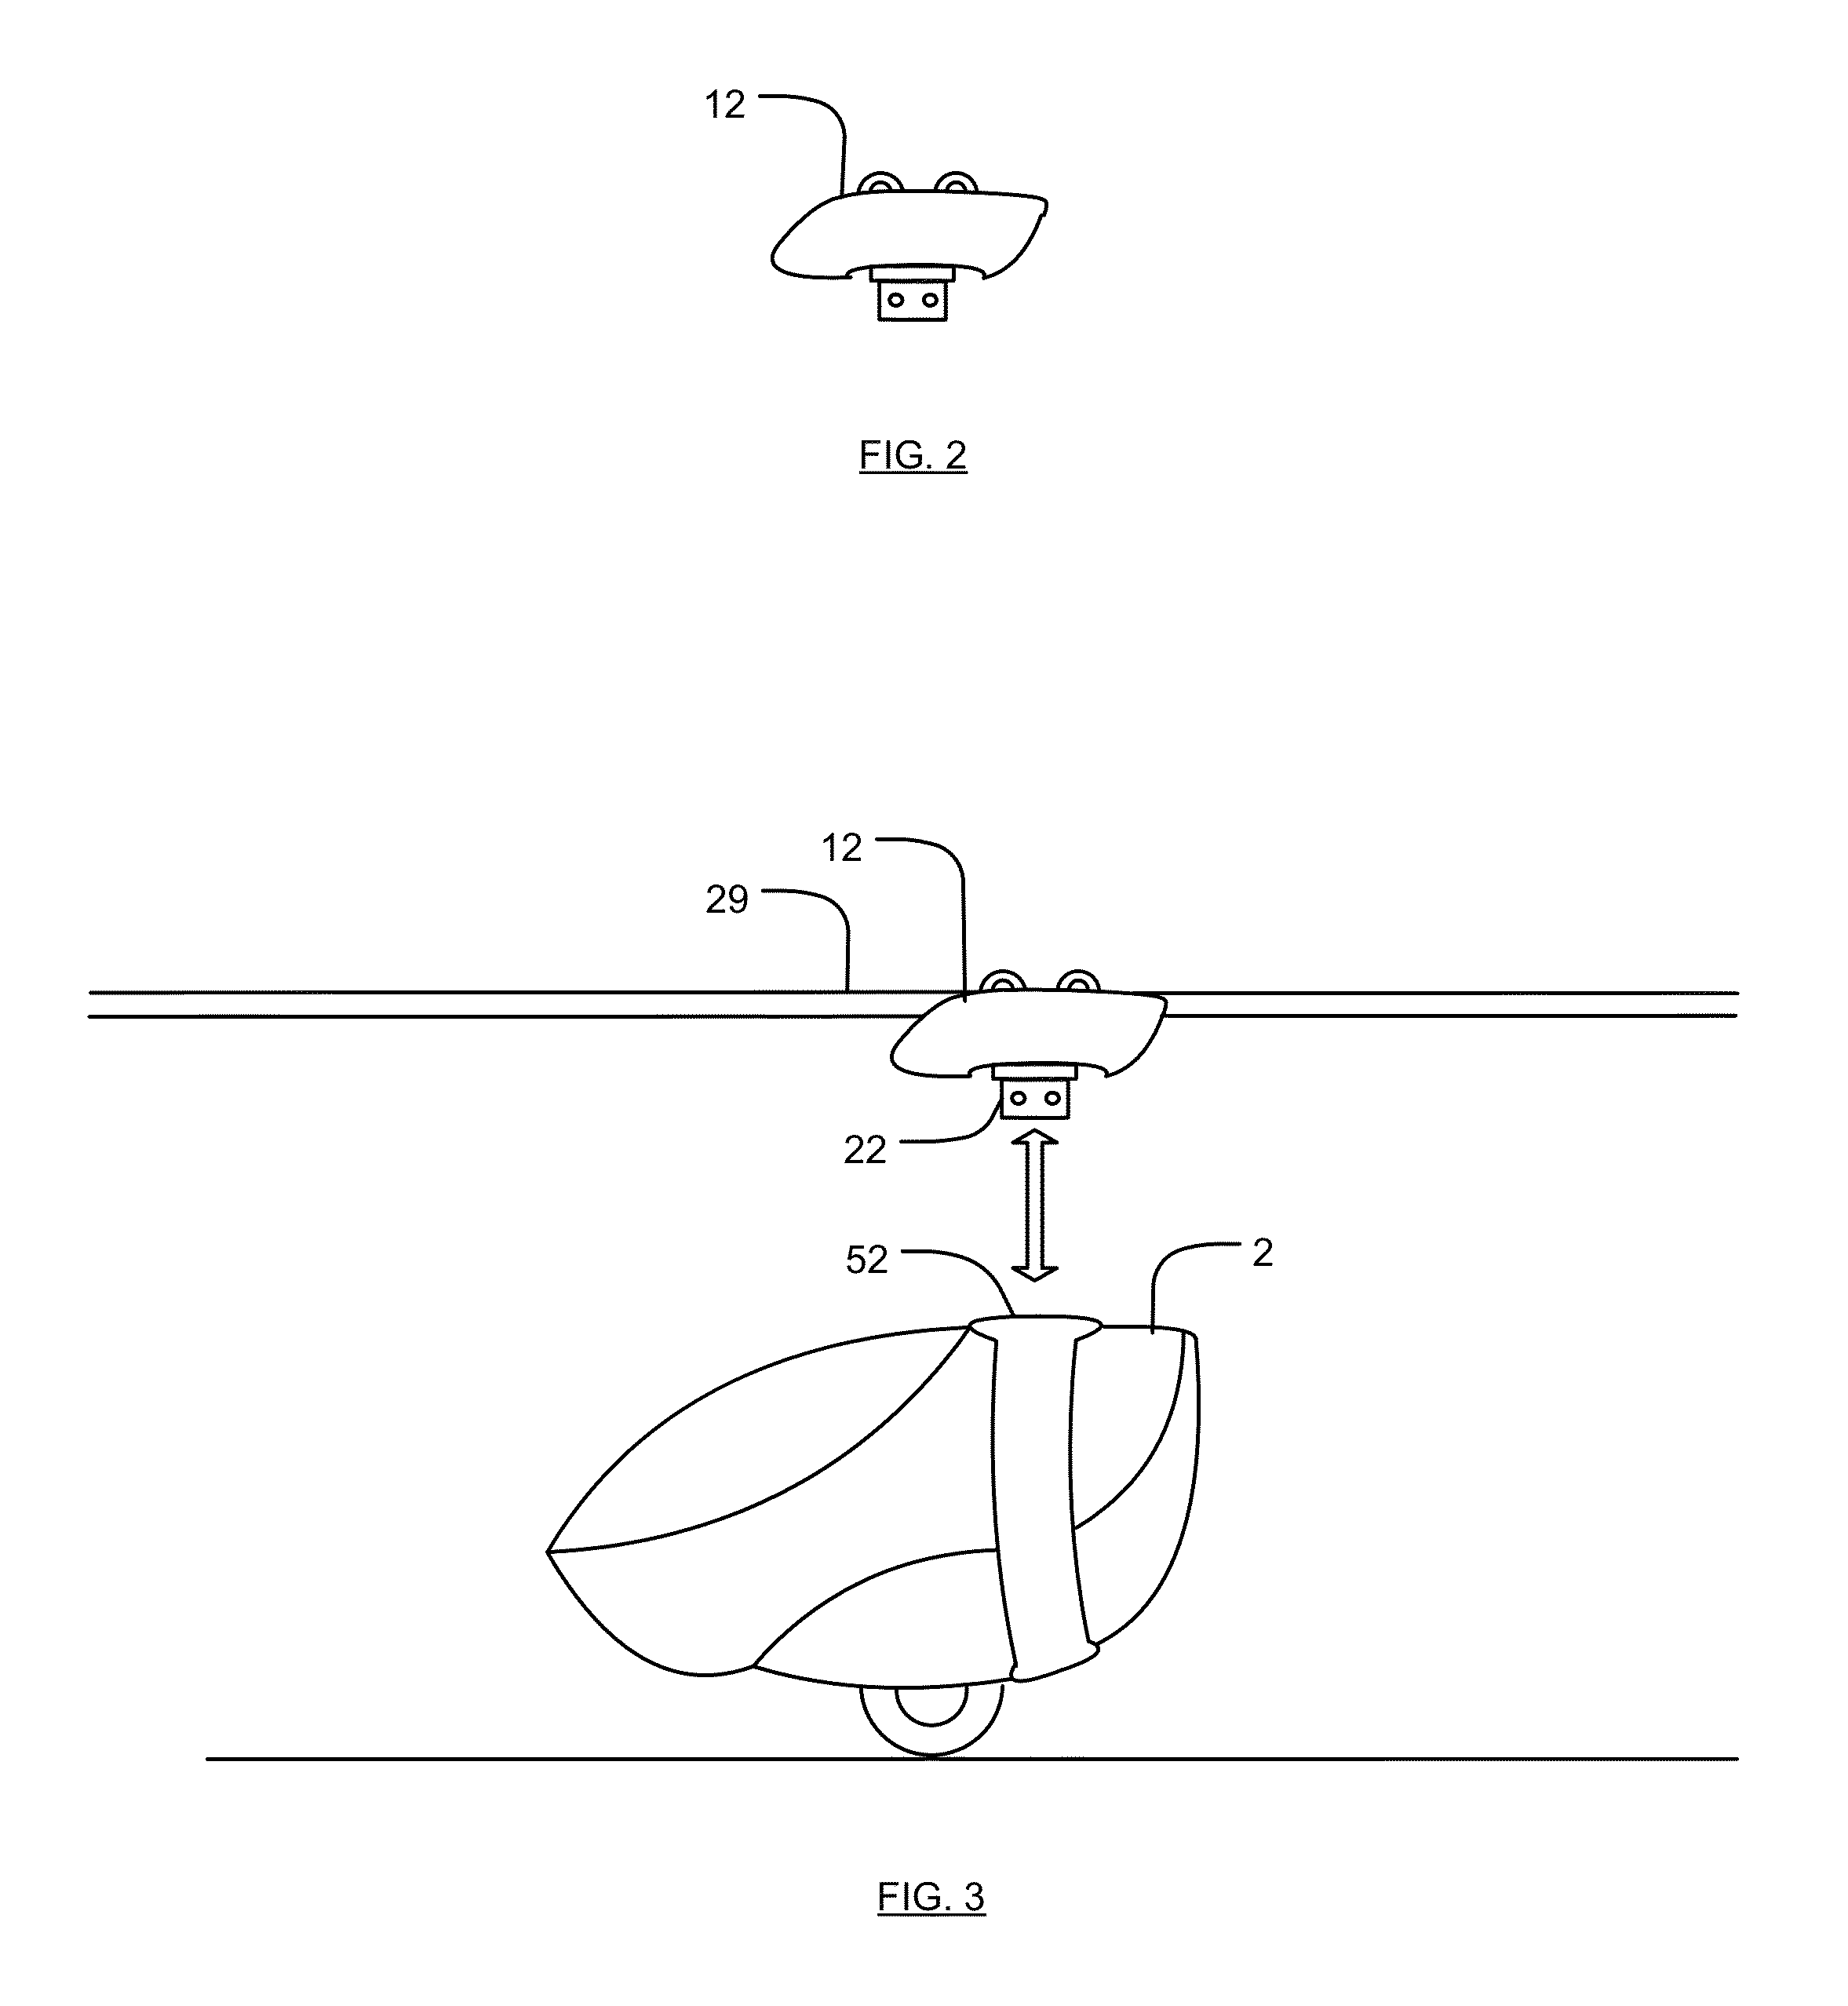 Automated vehicle conveyance apparatus transportation system